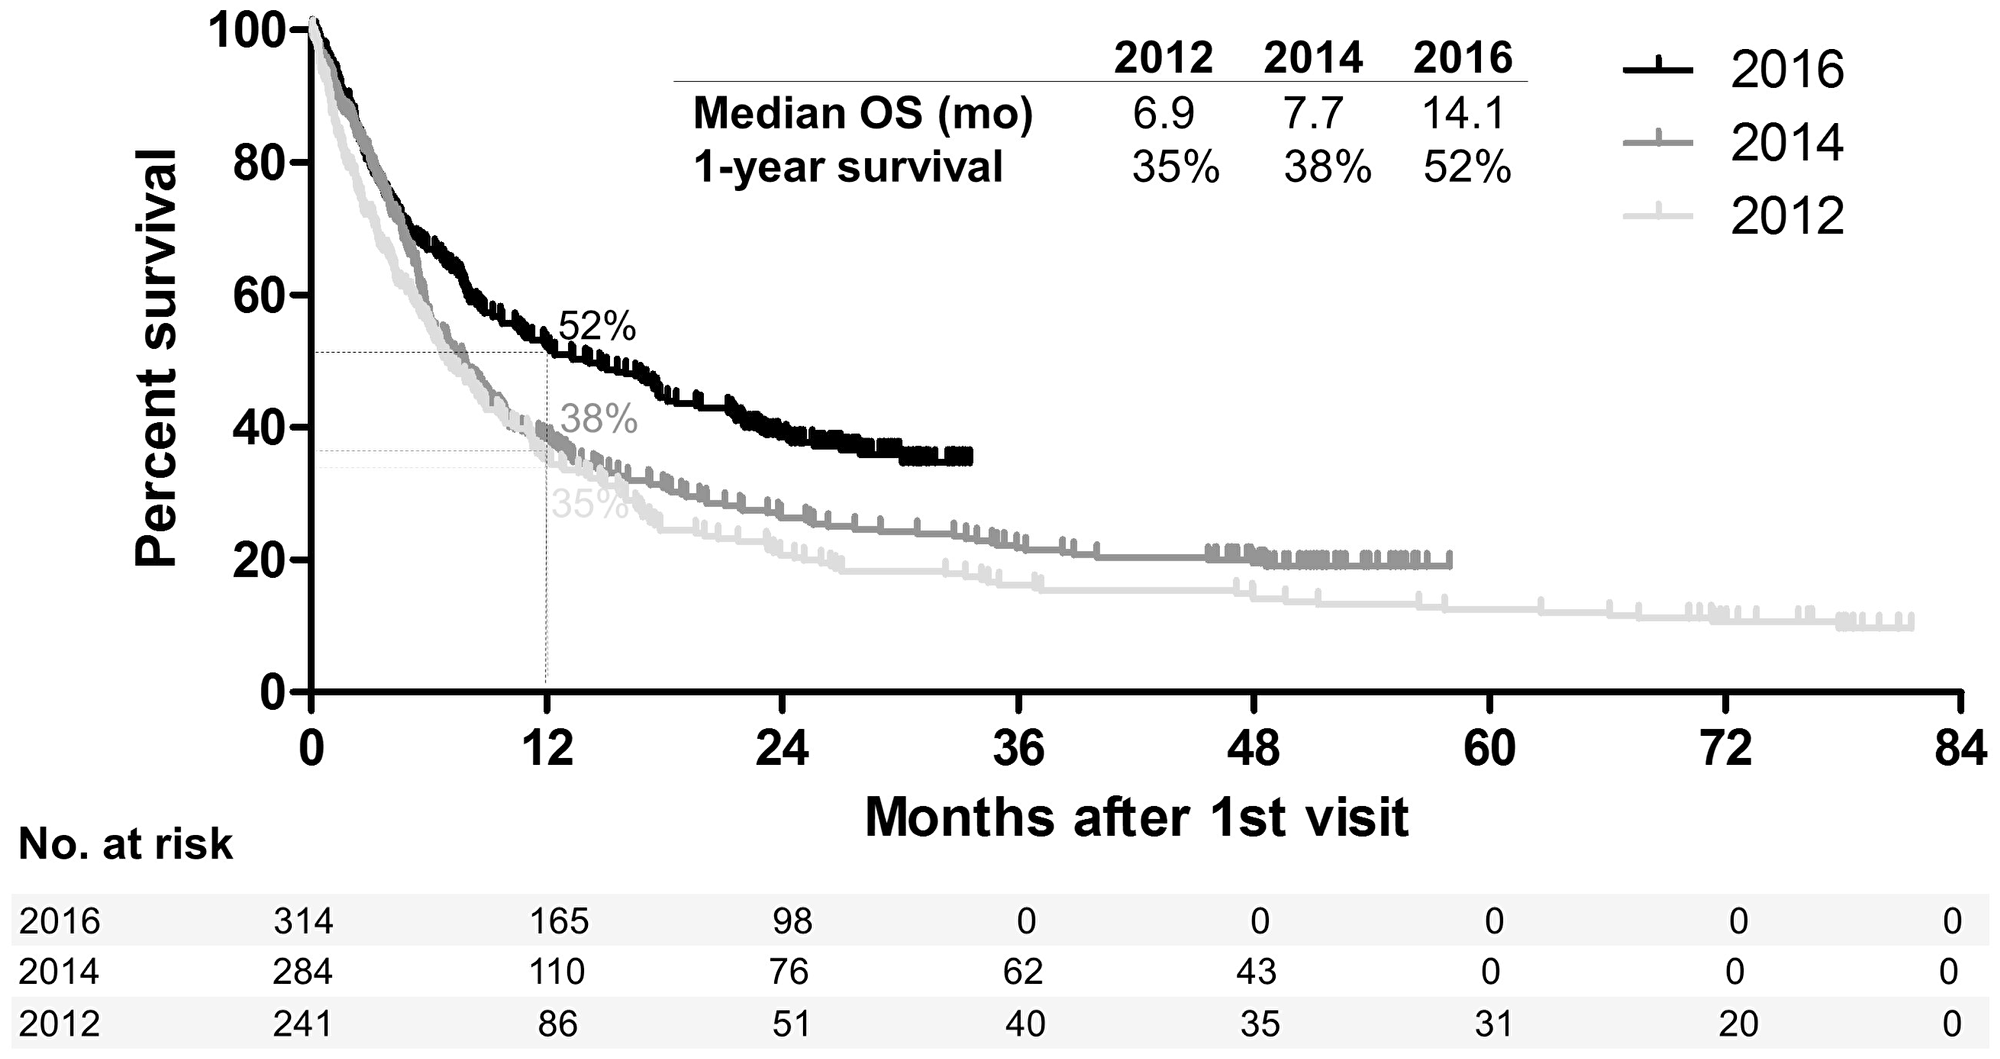 Survival of patients diagnosed with metastatic melanoma in the pre-modern era (2012), early-modern era (2014) and modern era (2016).